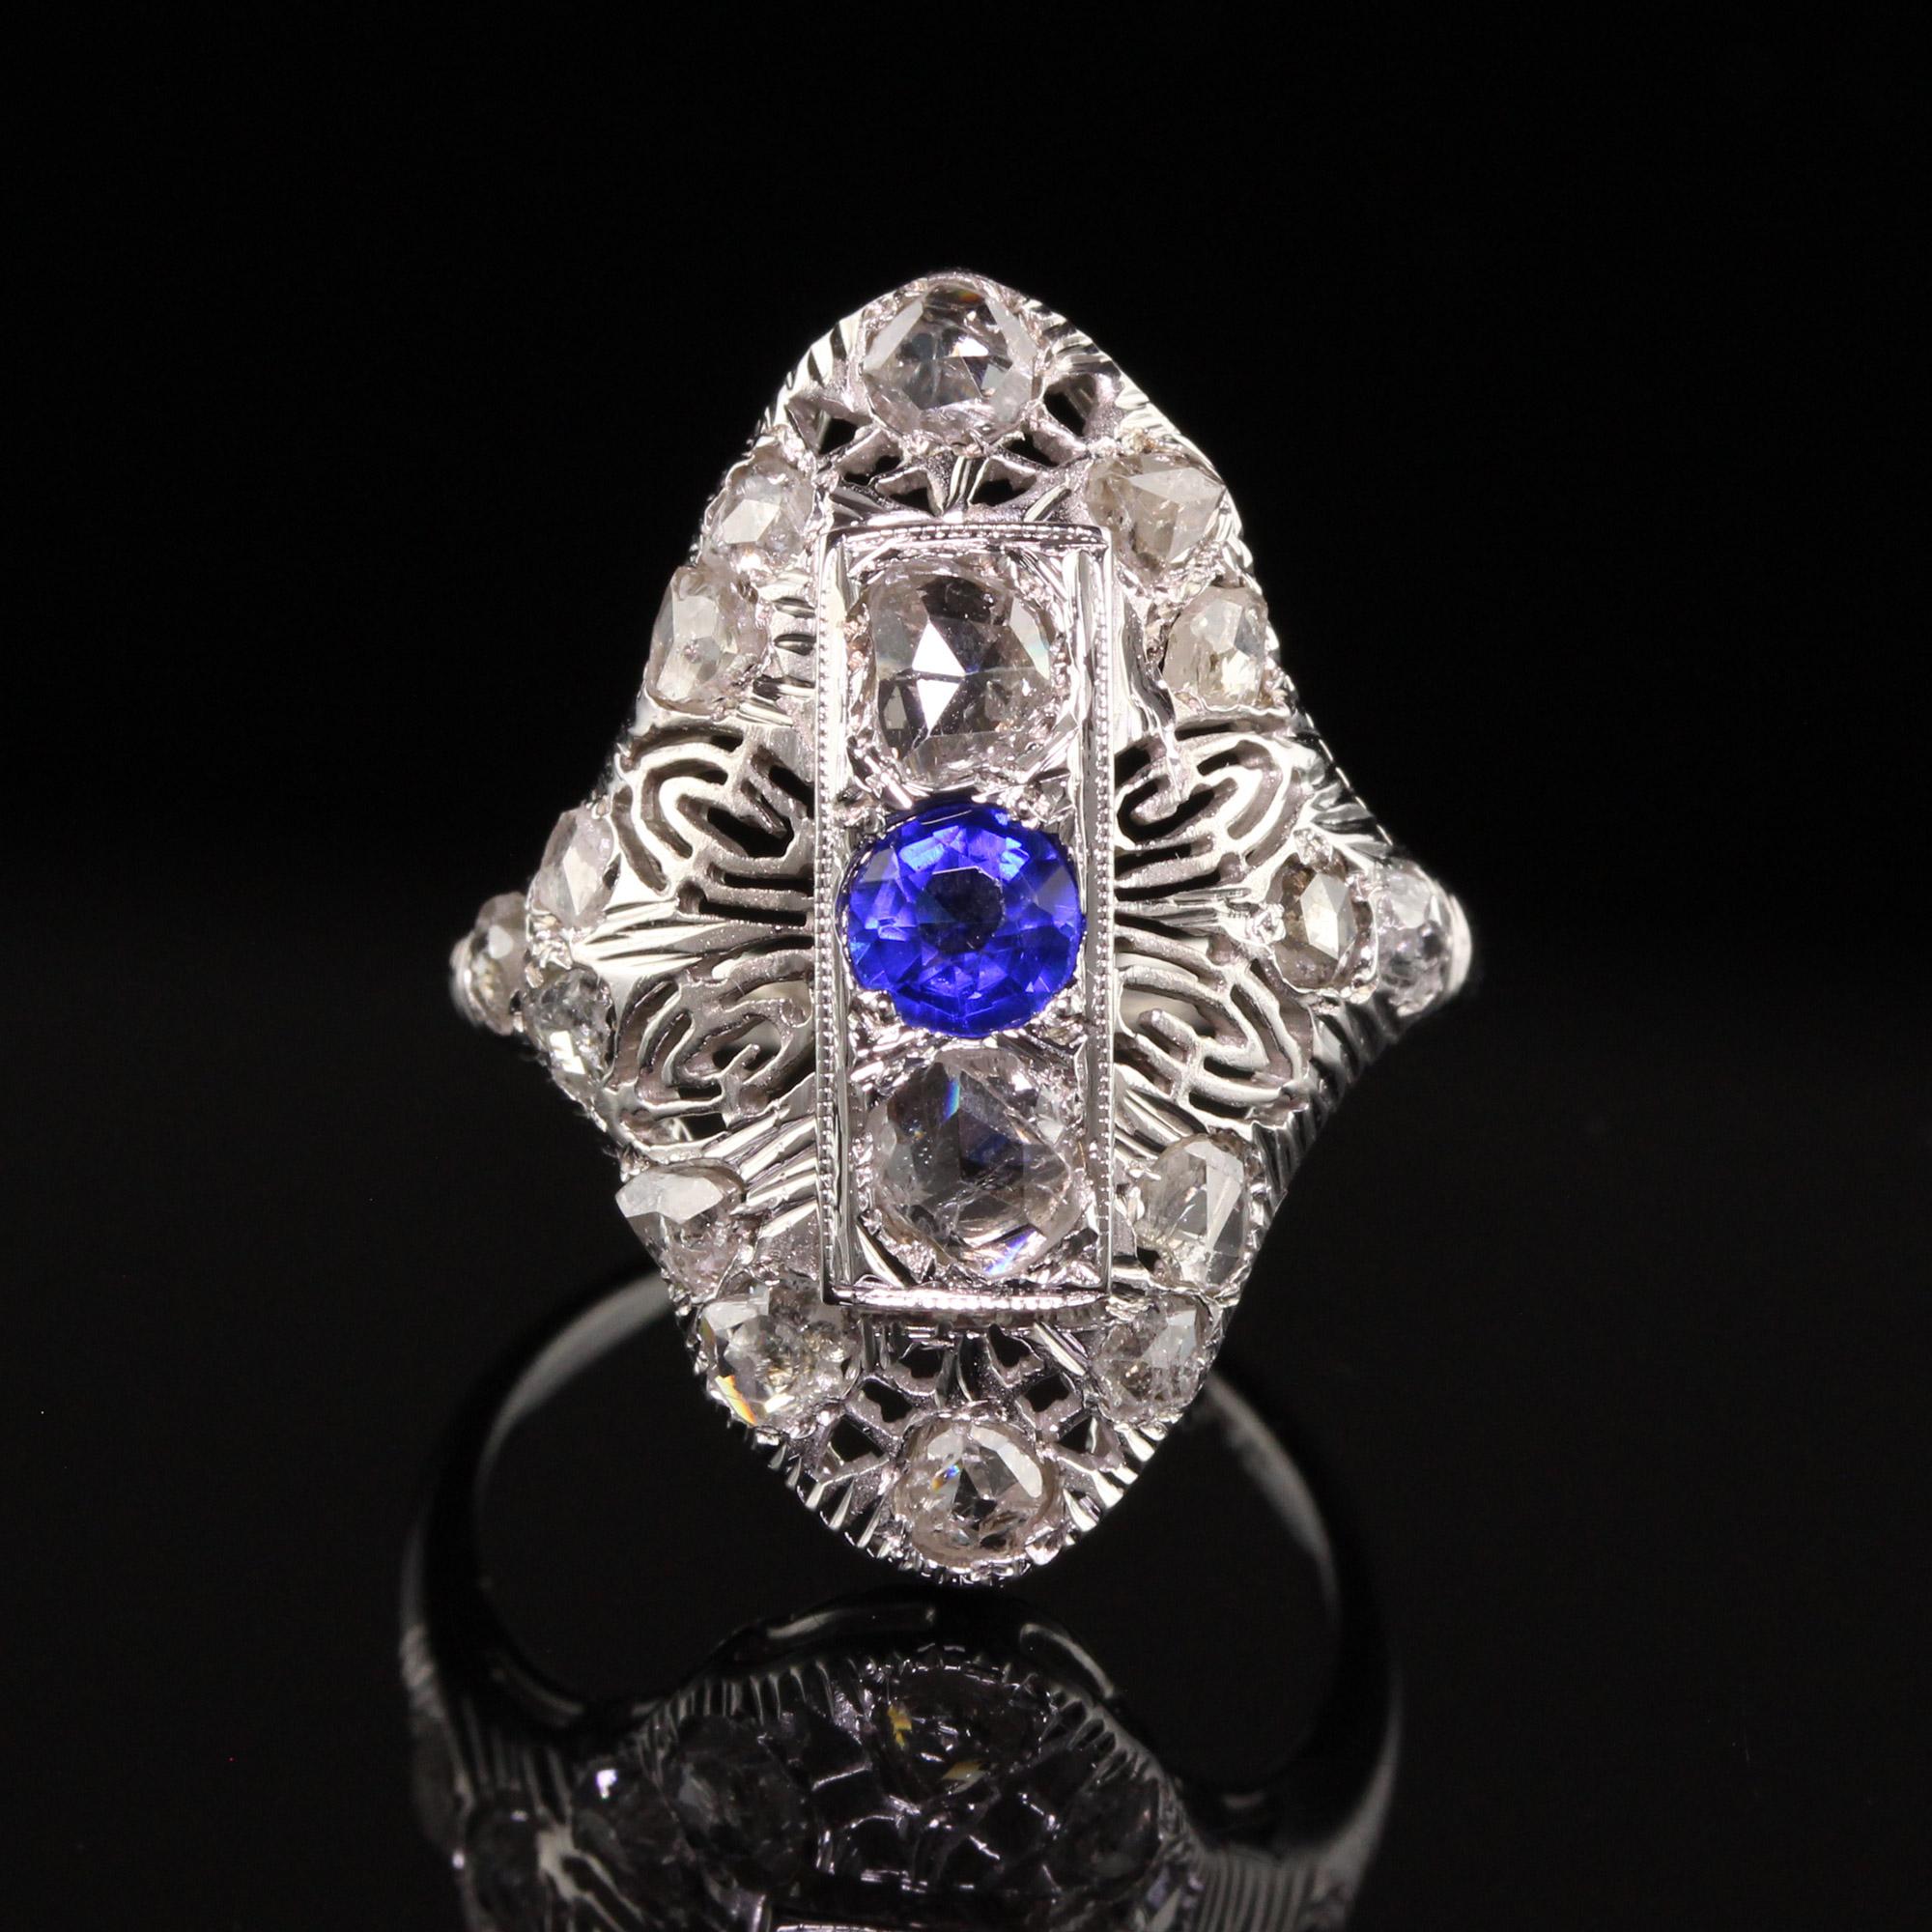 Antique Art Deco 14K White Gold Rose Cut Diamond Filigree Shield Ring In Good Condition For Sale In Great Neck, NY